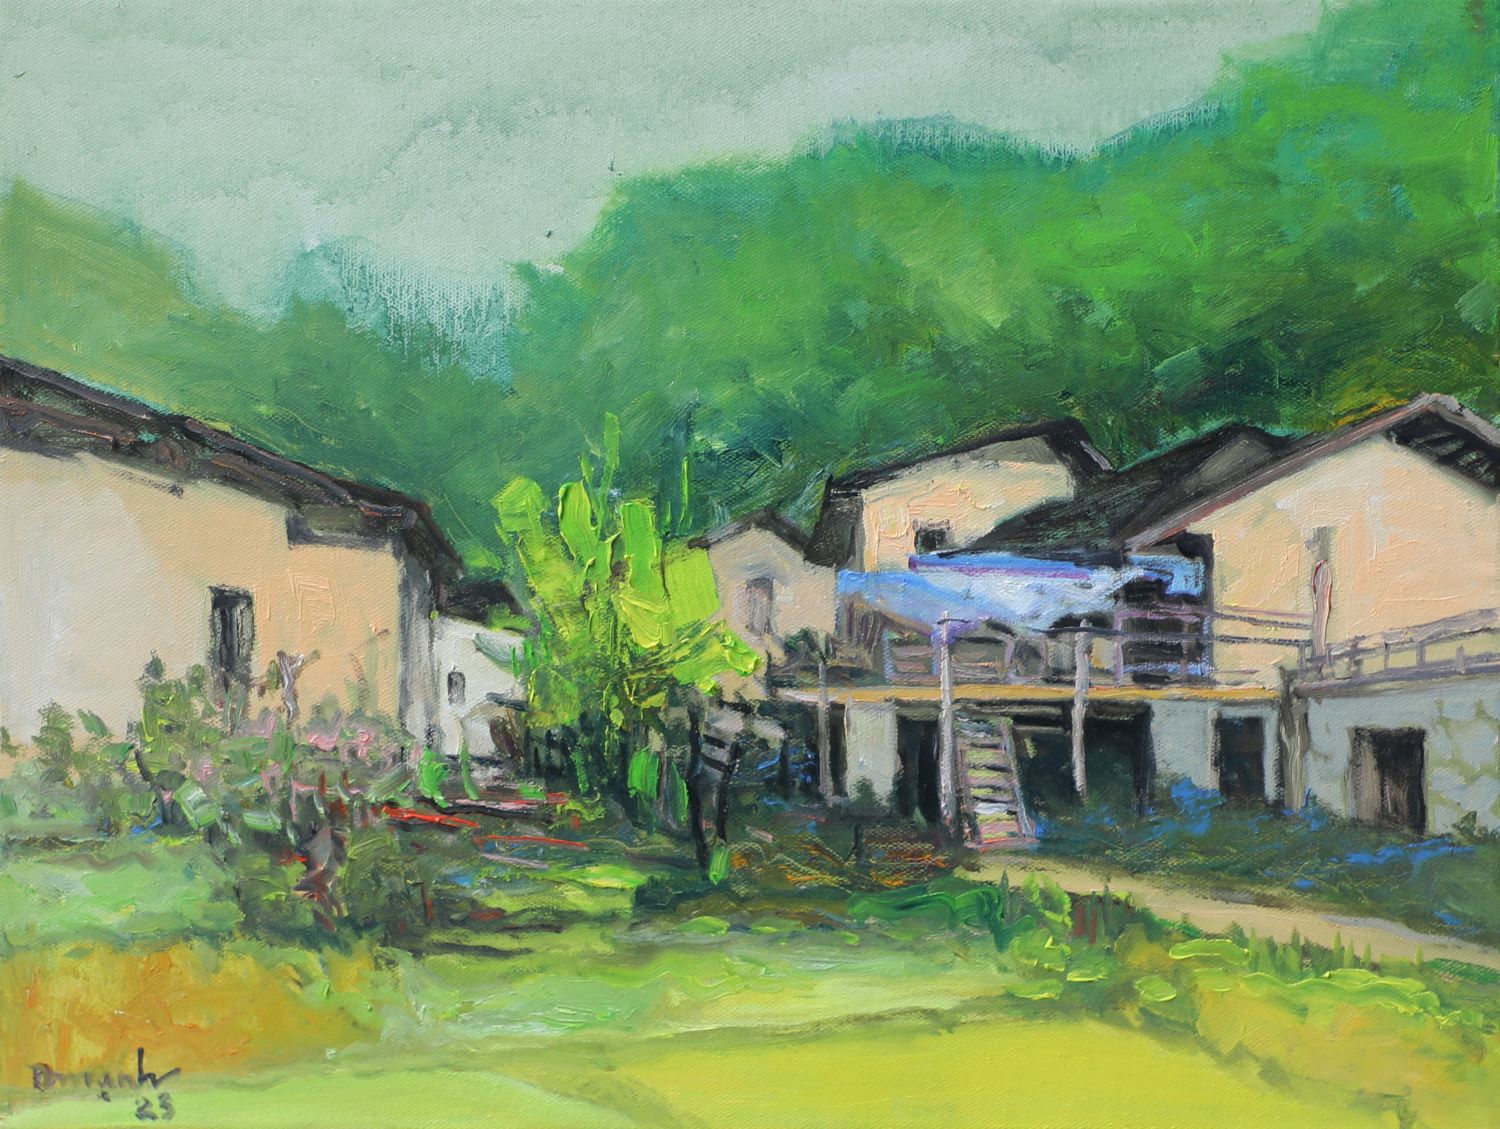 Green Afternoon - Vietnamese Oil Painting by Artist Lam Duc Manh